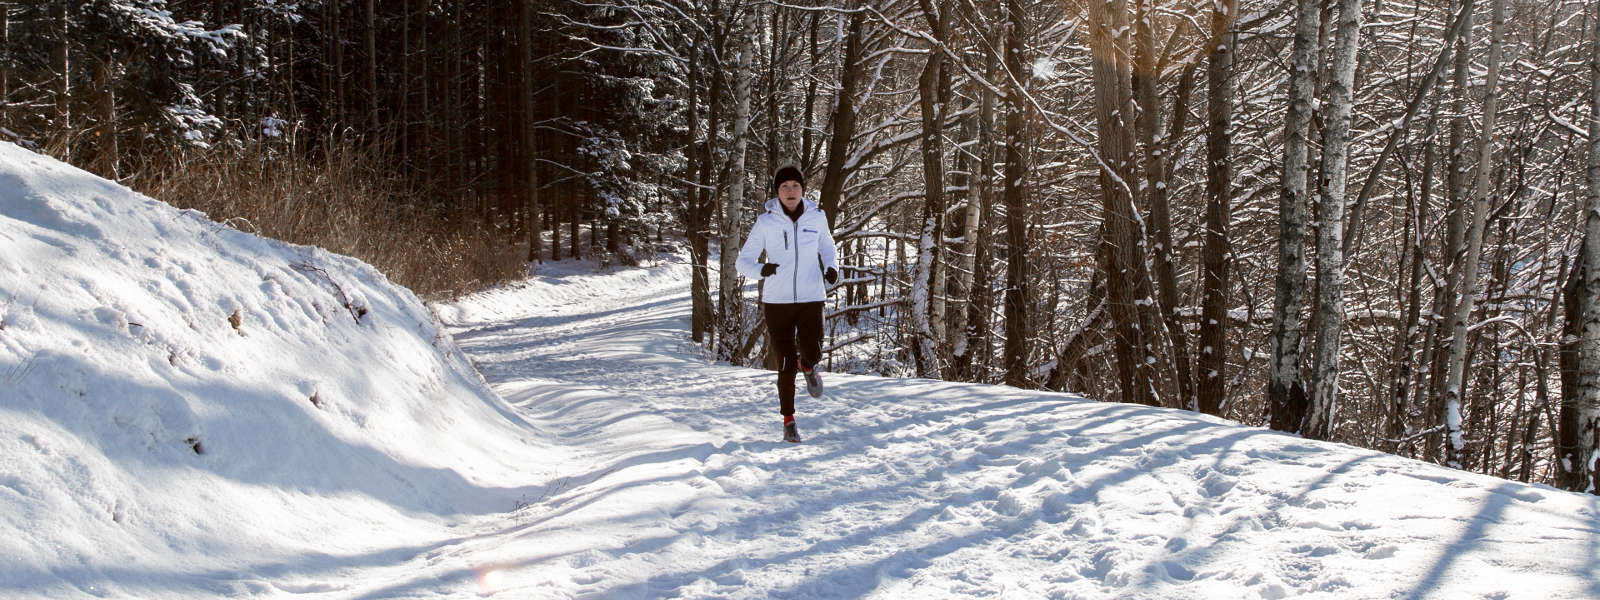 Woman in a white running jacket jogges on a snow -covered path between trees and looks towards the camera